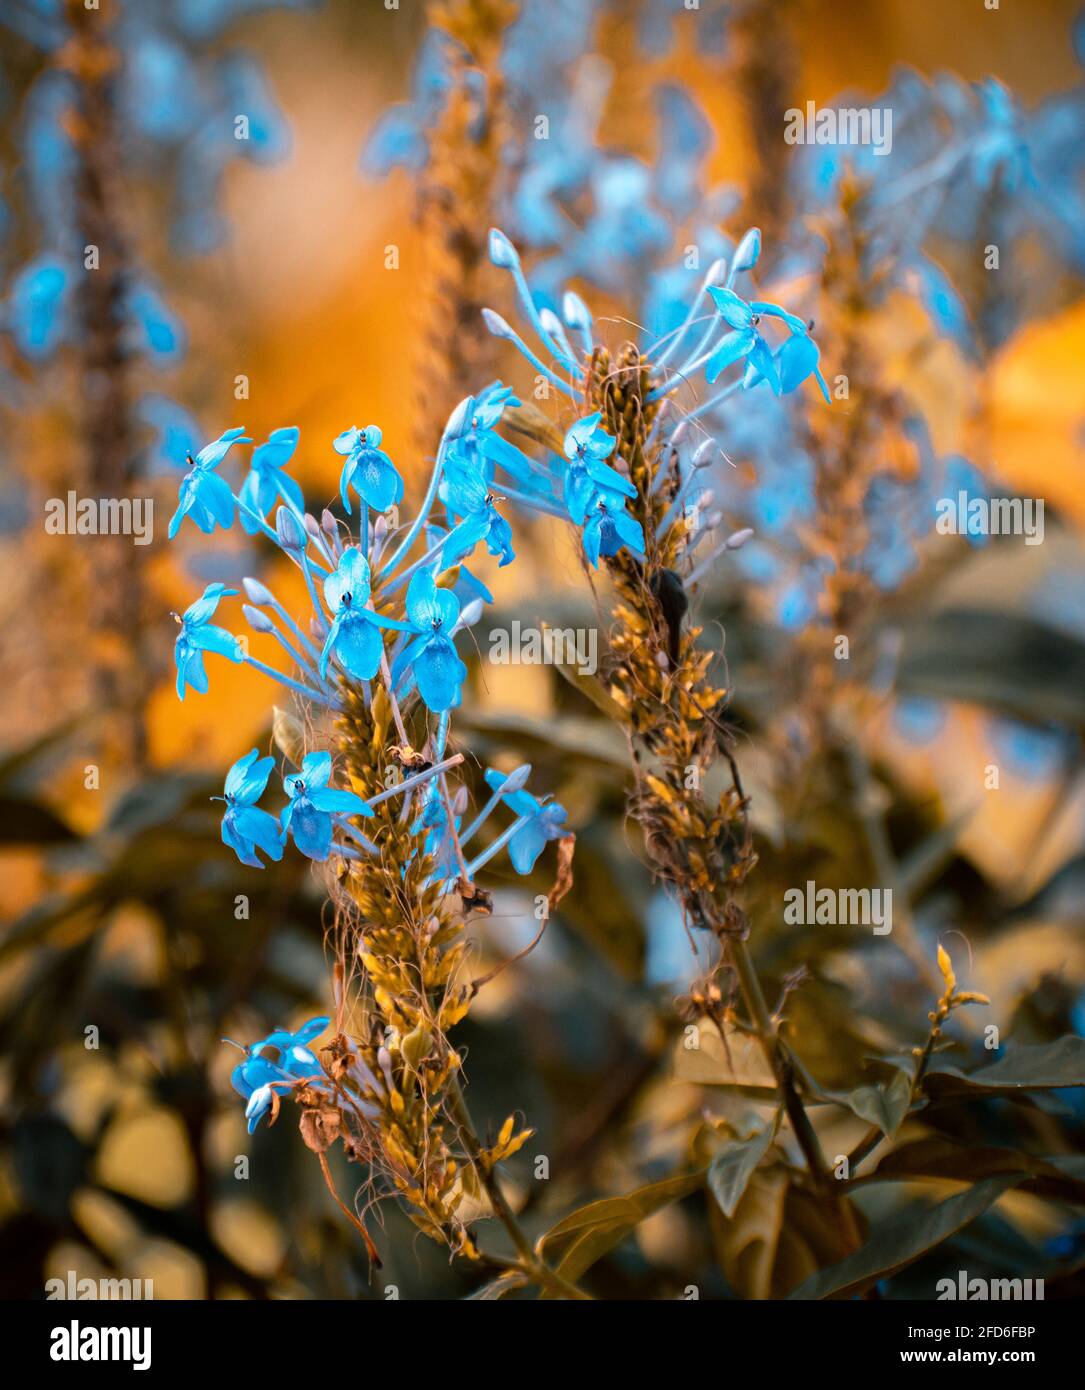 betony flowers close up natural conditions and early sunlight Stock Photo